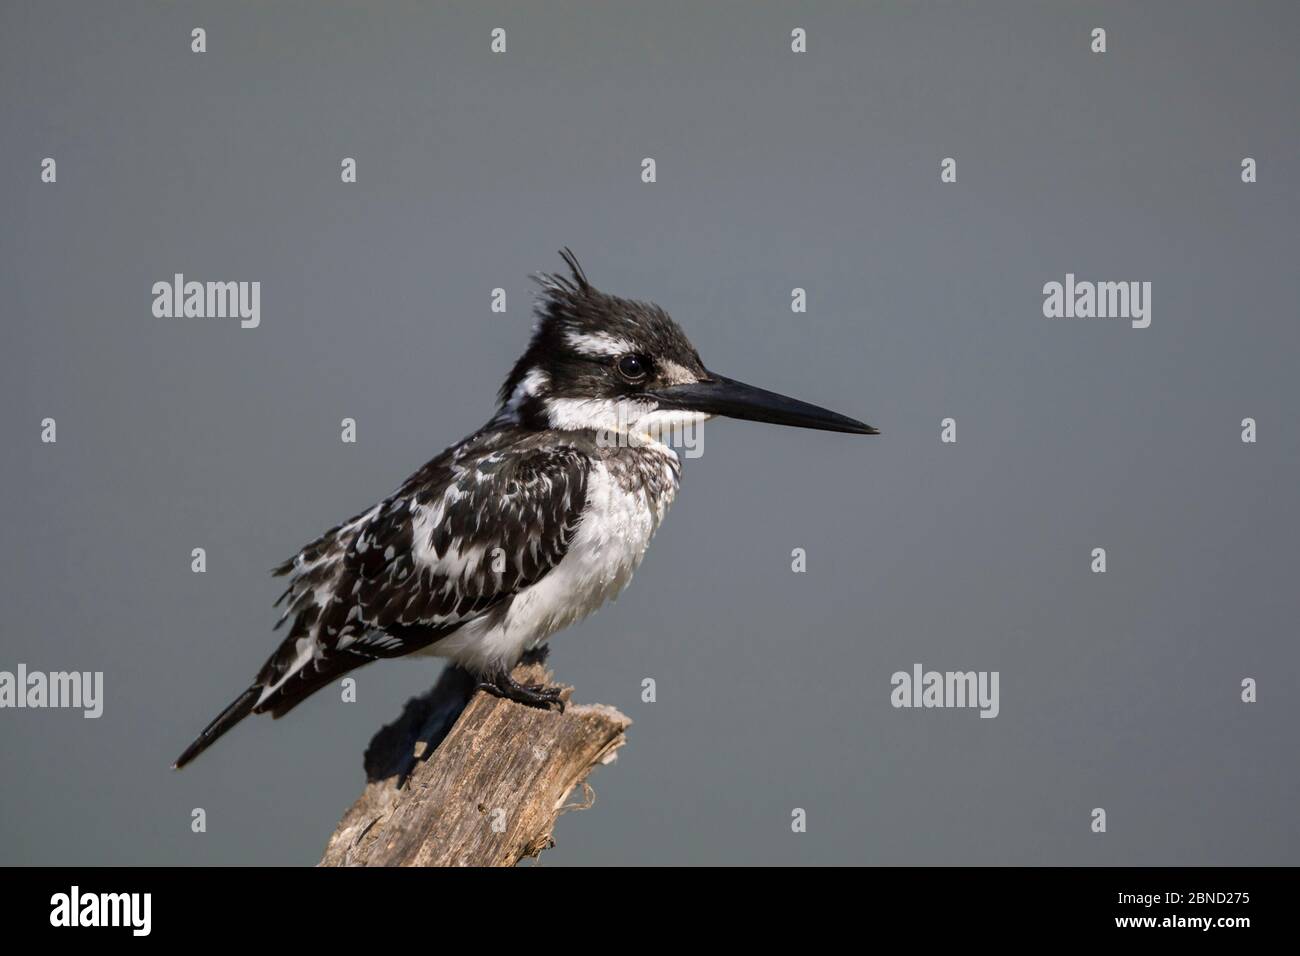 Pied kingfisher (Ceryle rudis) perched on a dead branch at a waterhole, Venetia Limpopo Nature Reserve, Limpopo Province, South Africa. Stock Photo